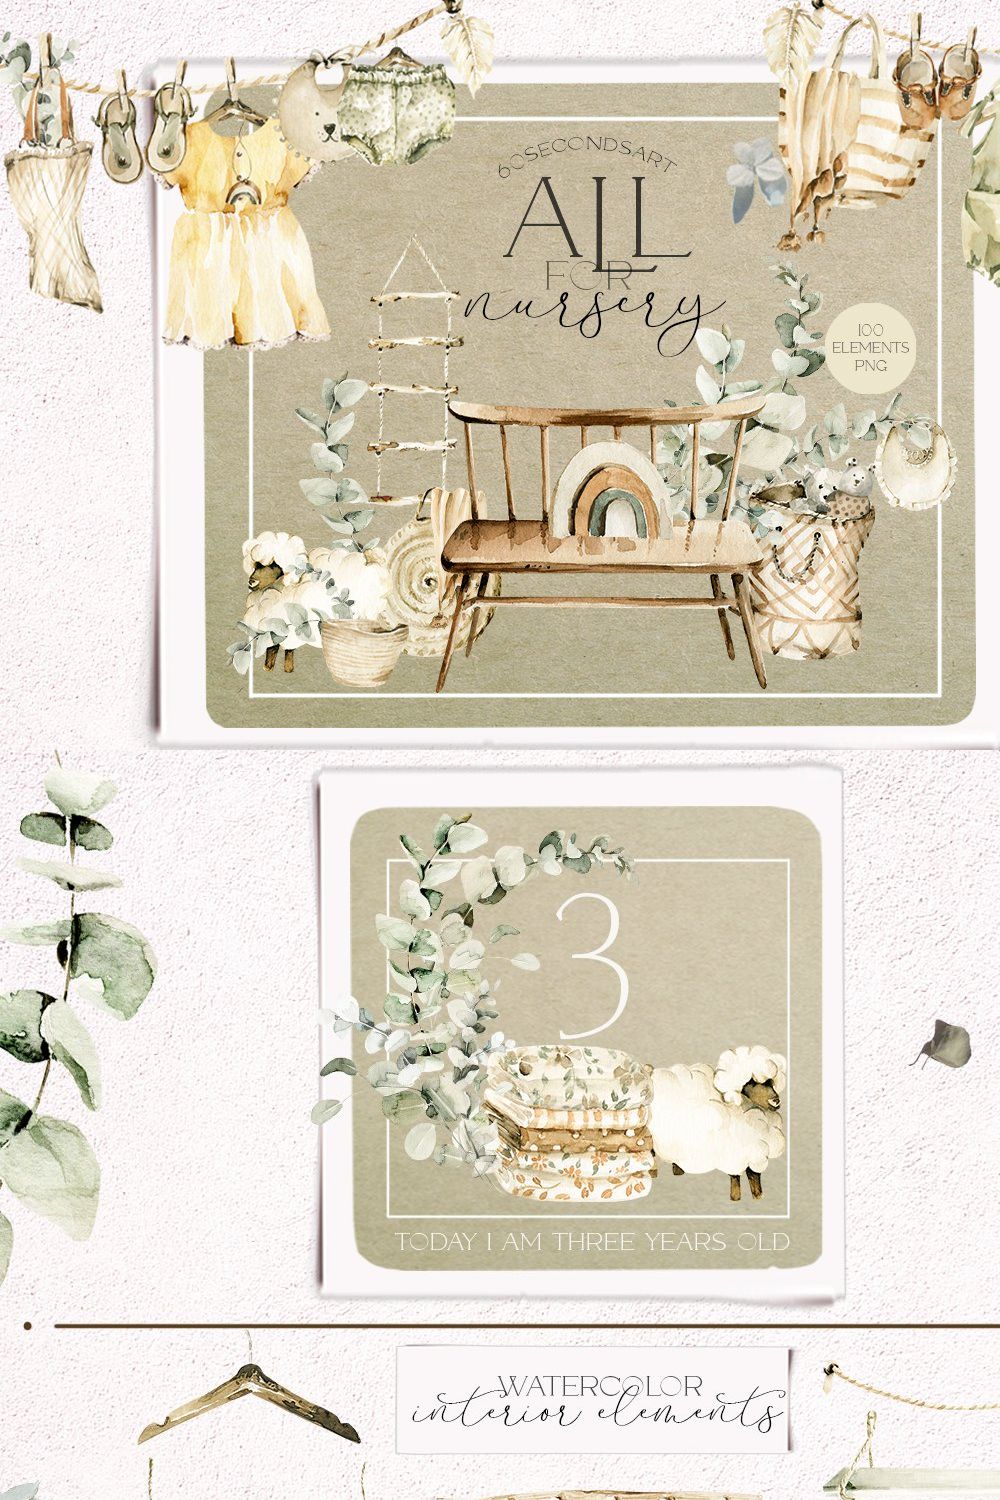 Boho nursery clipart Baby watercolor pinterest preview image.